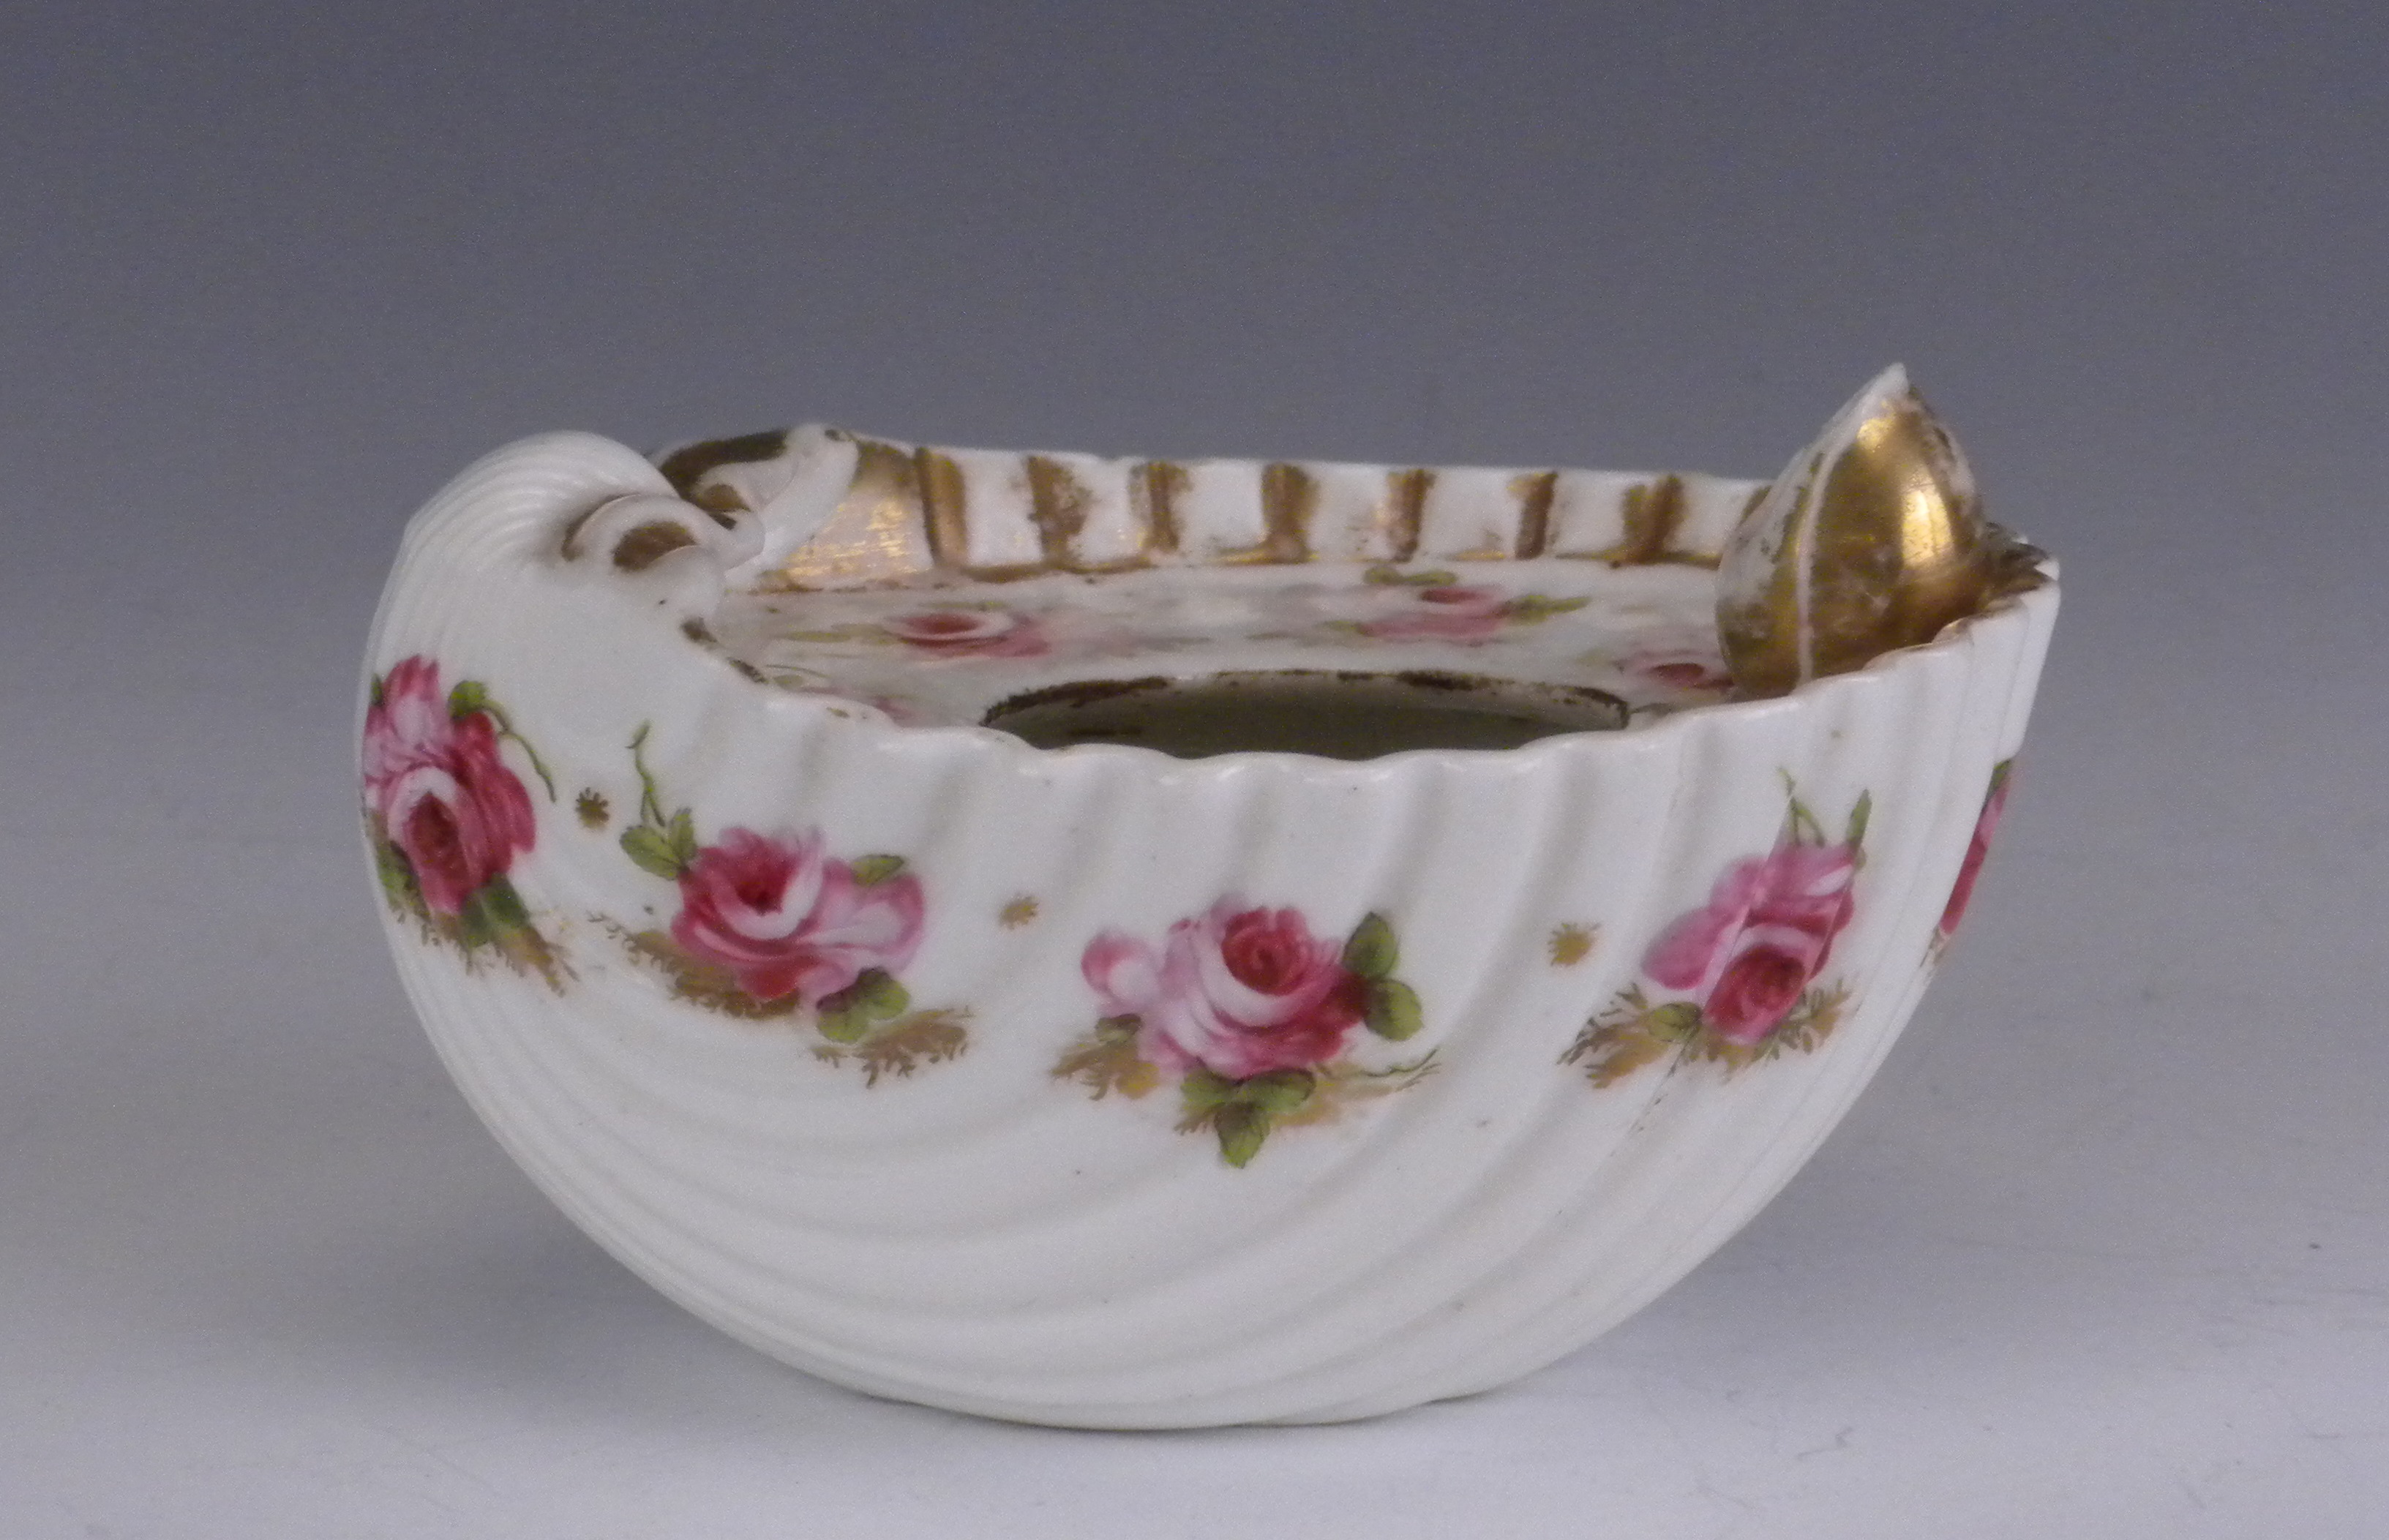 A Swansea porcelain shell Inkwell, circa 1815-1818, locally painted with rose sprigs on gilt seaweed